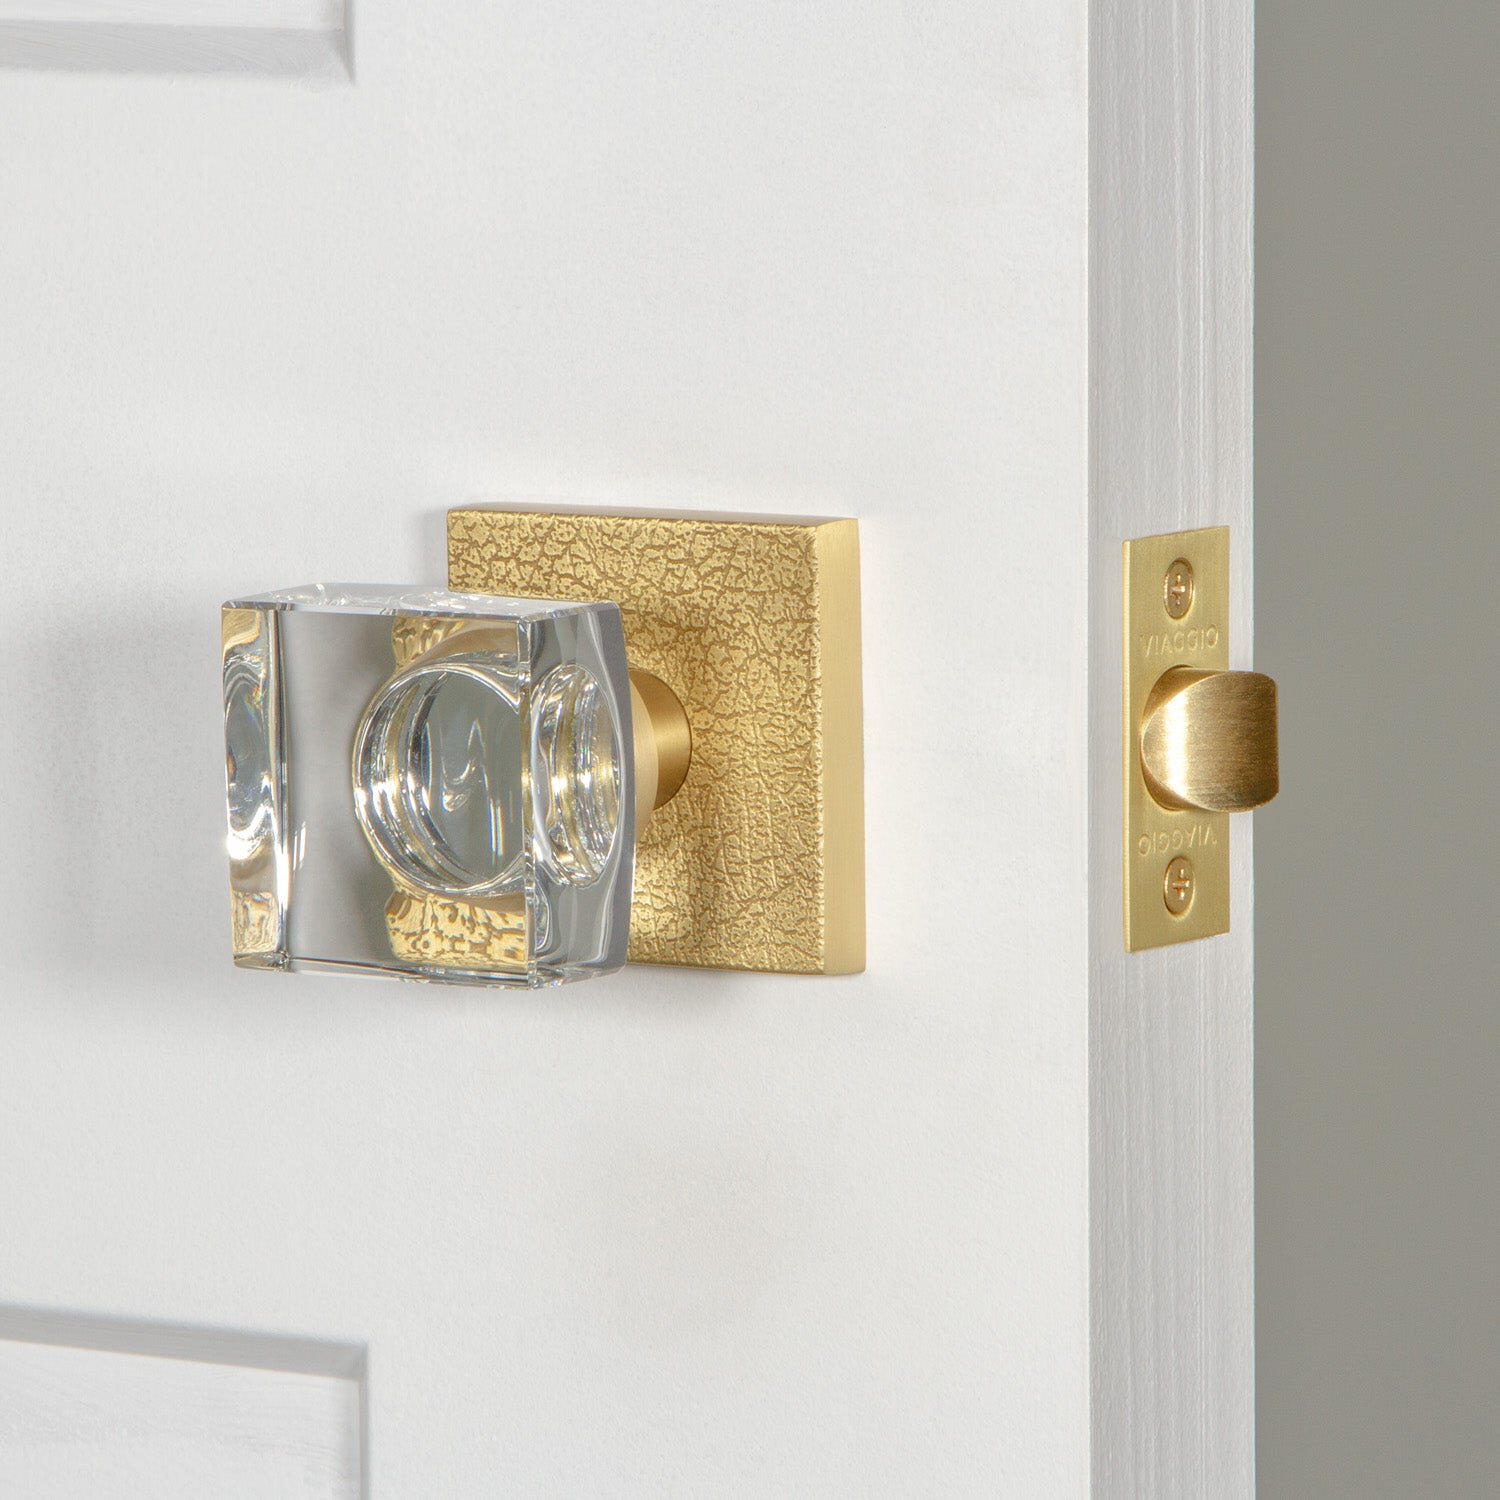 Your Questions Answered About Satin Brass - Viaggio Hardware